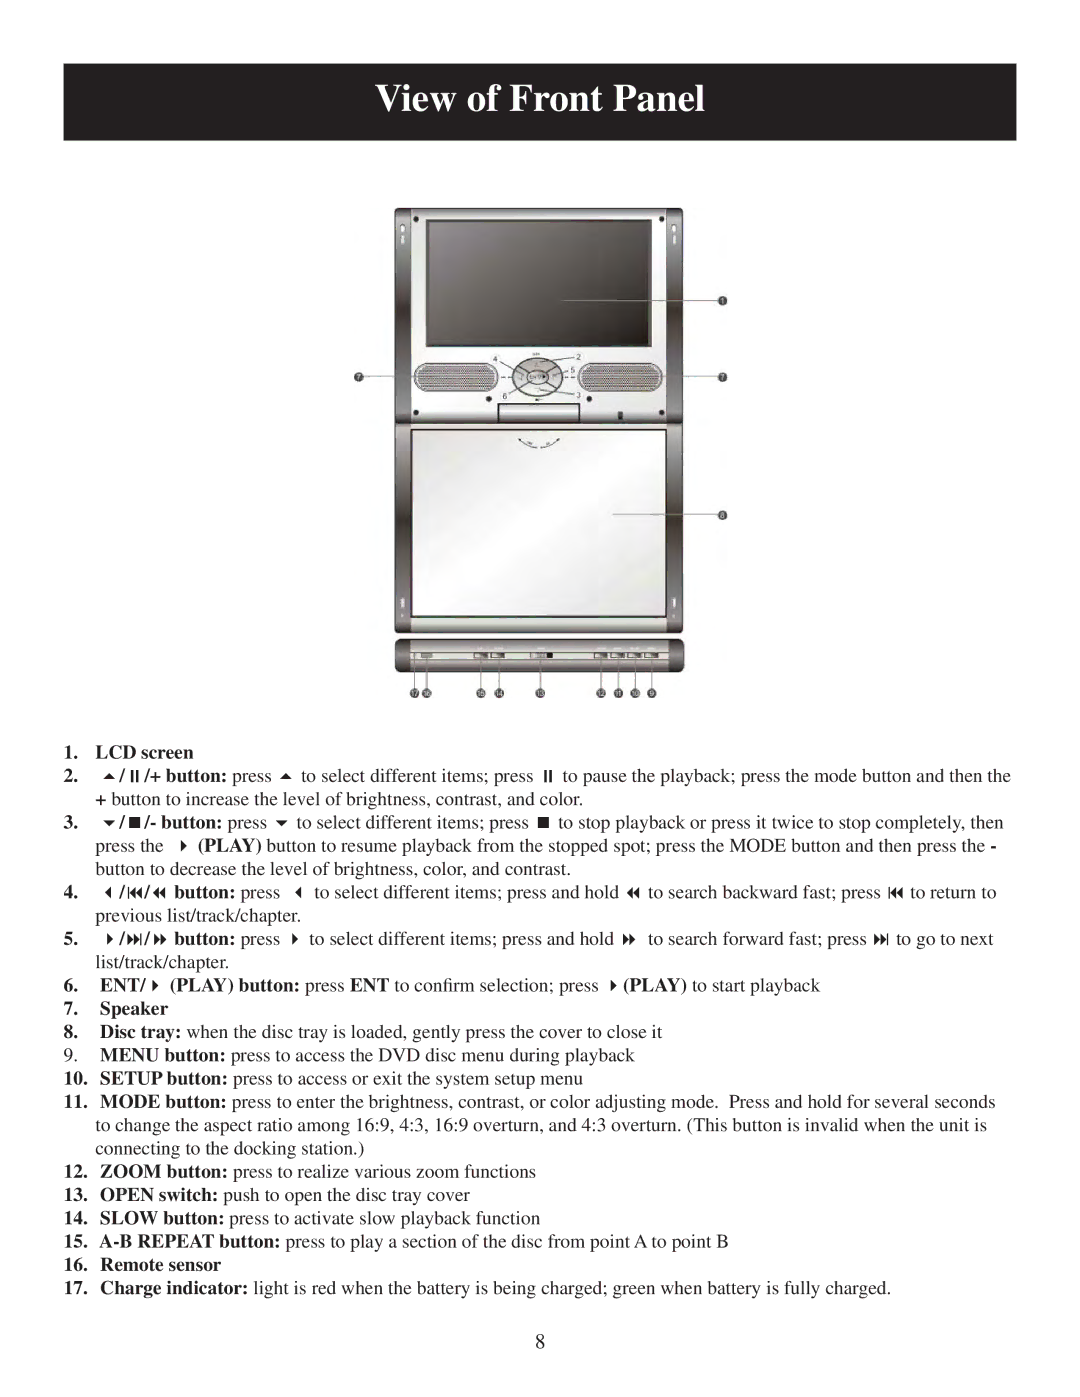 Polaroid PDM-8553M user manual View of Front Panel, LCD screen + button press To select different items press 